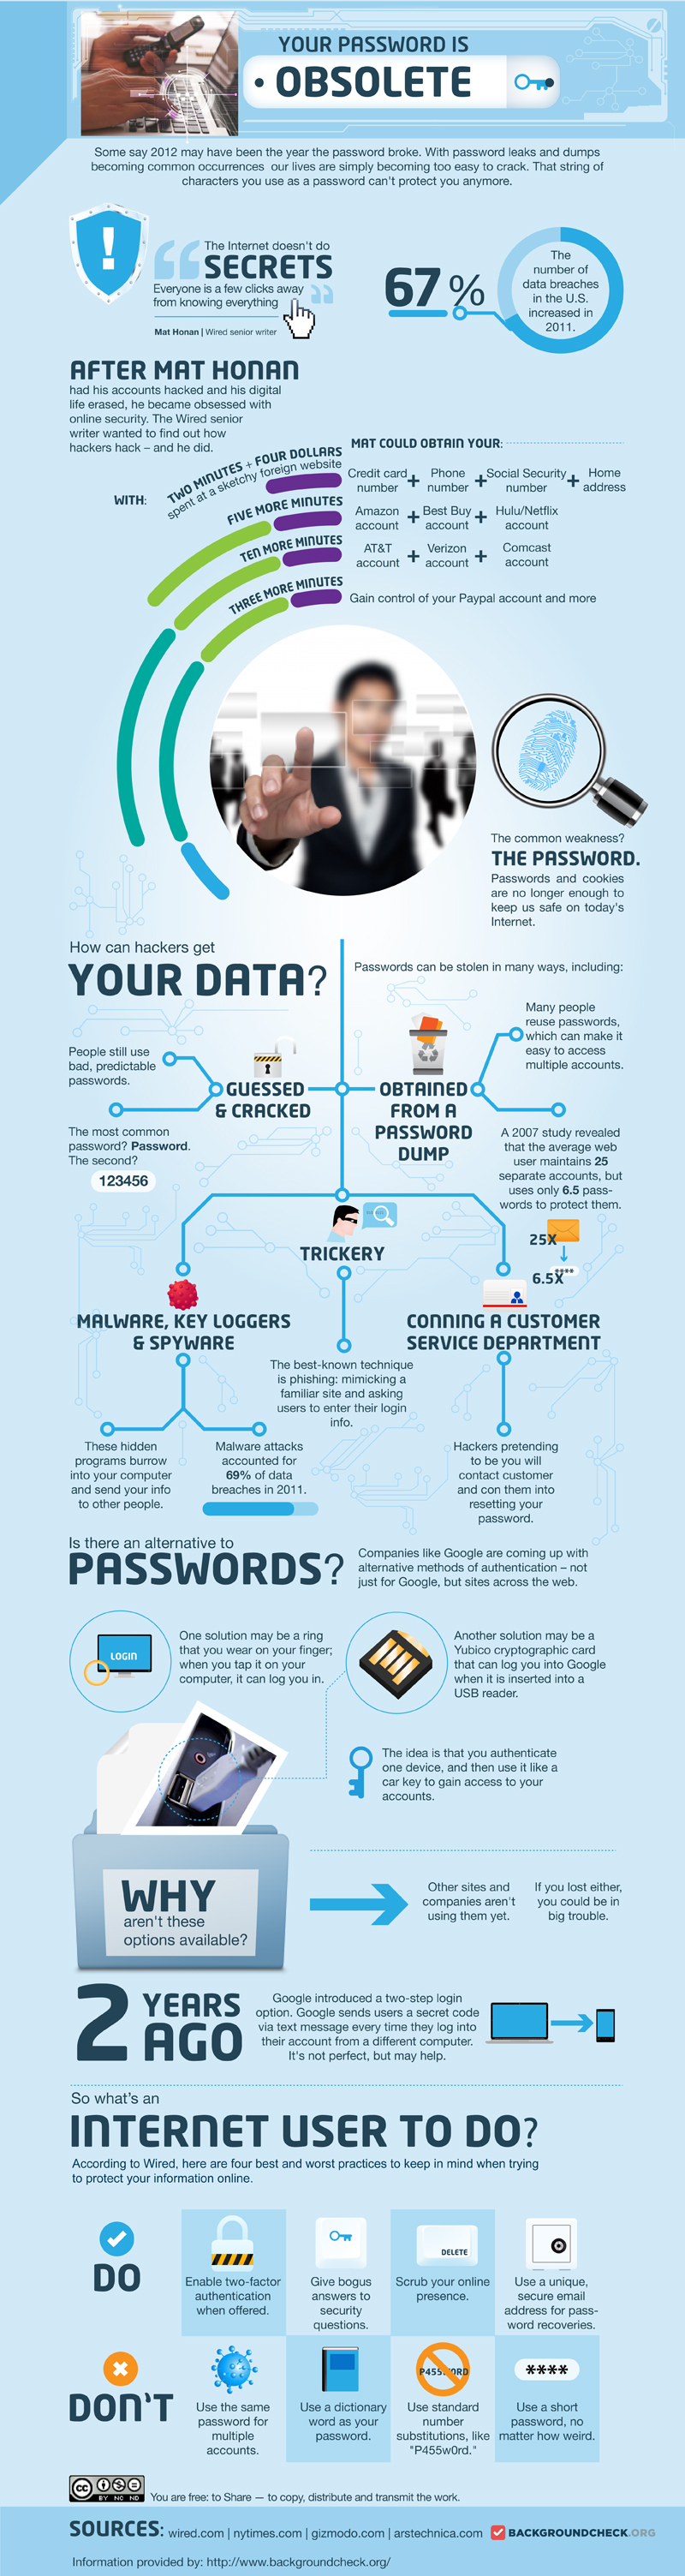 Is Your Password Obsolete?